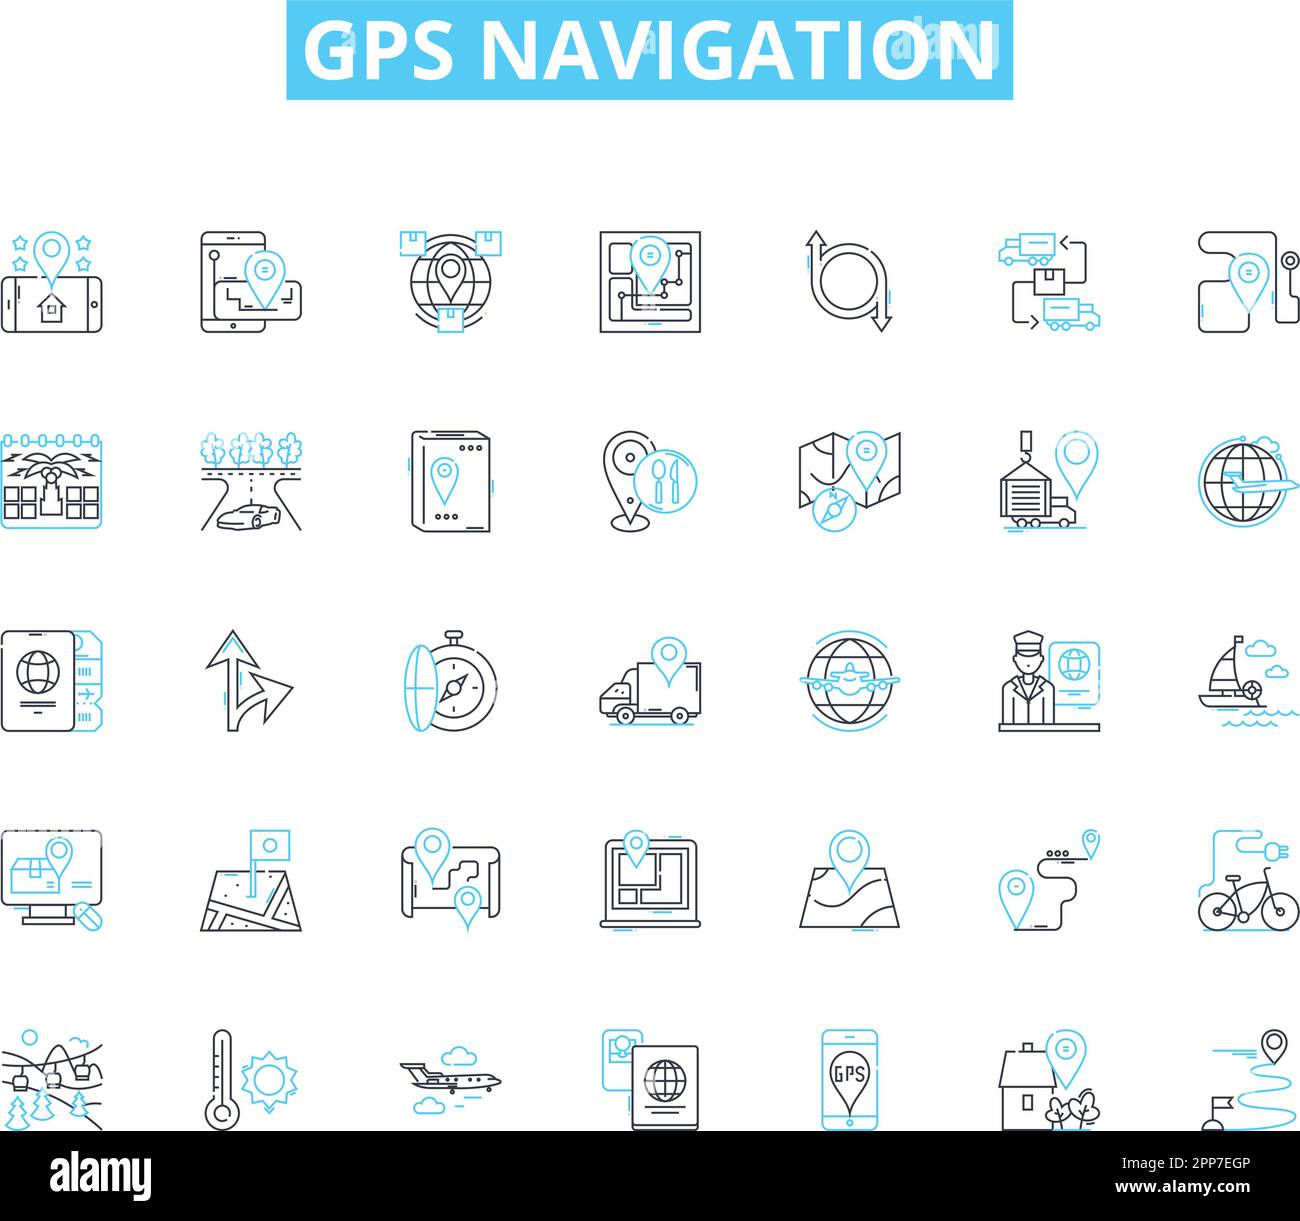 Gps navigation linear icons set. Satellites, Coordinates, Maps, Location, Routing, Waypoints, Signals line vector and concept signs. Accuracy,Tracking Stock Vector